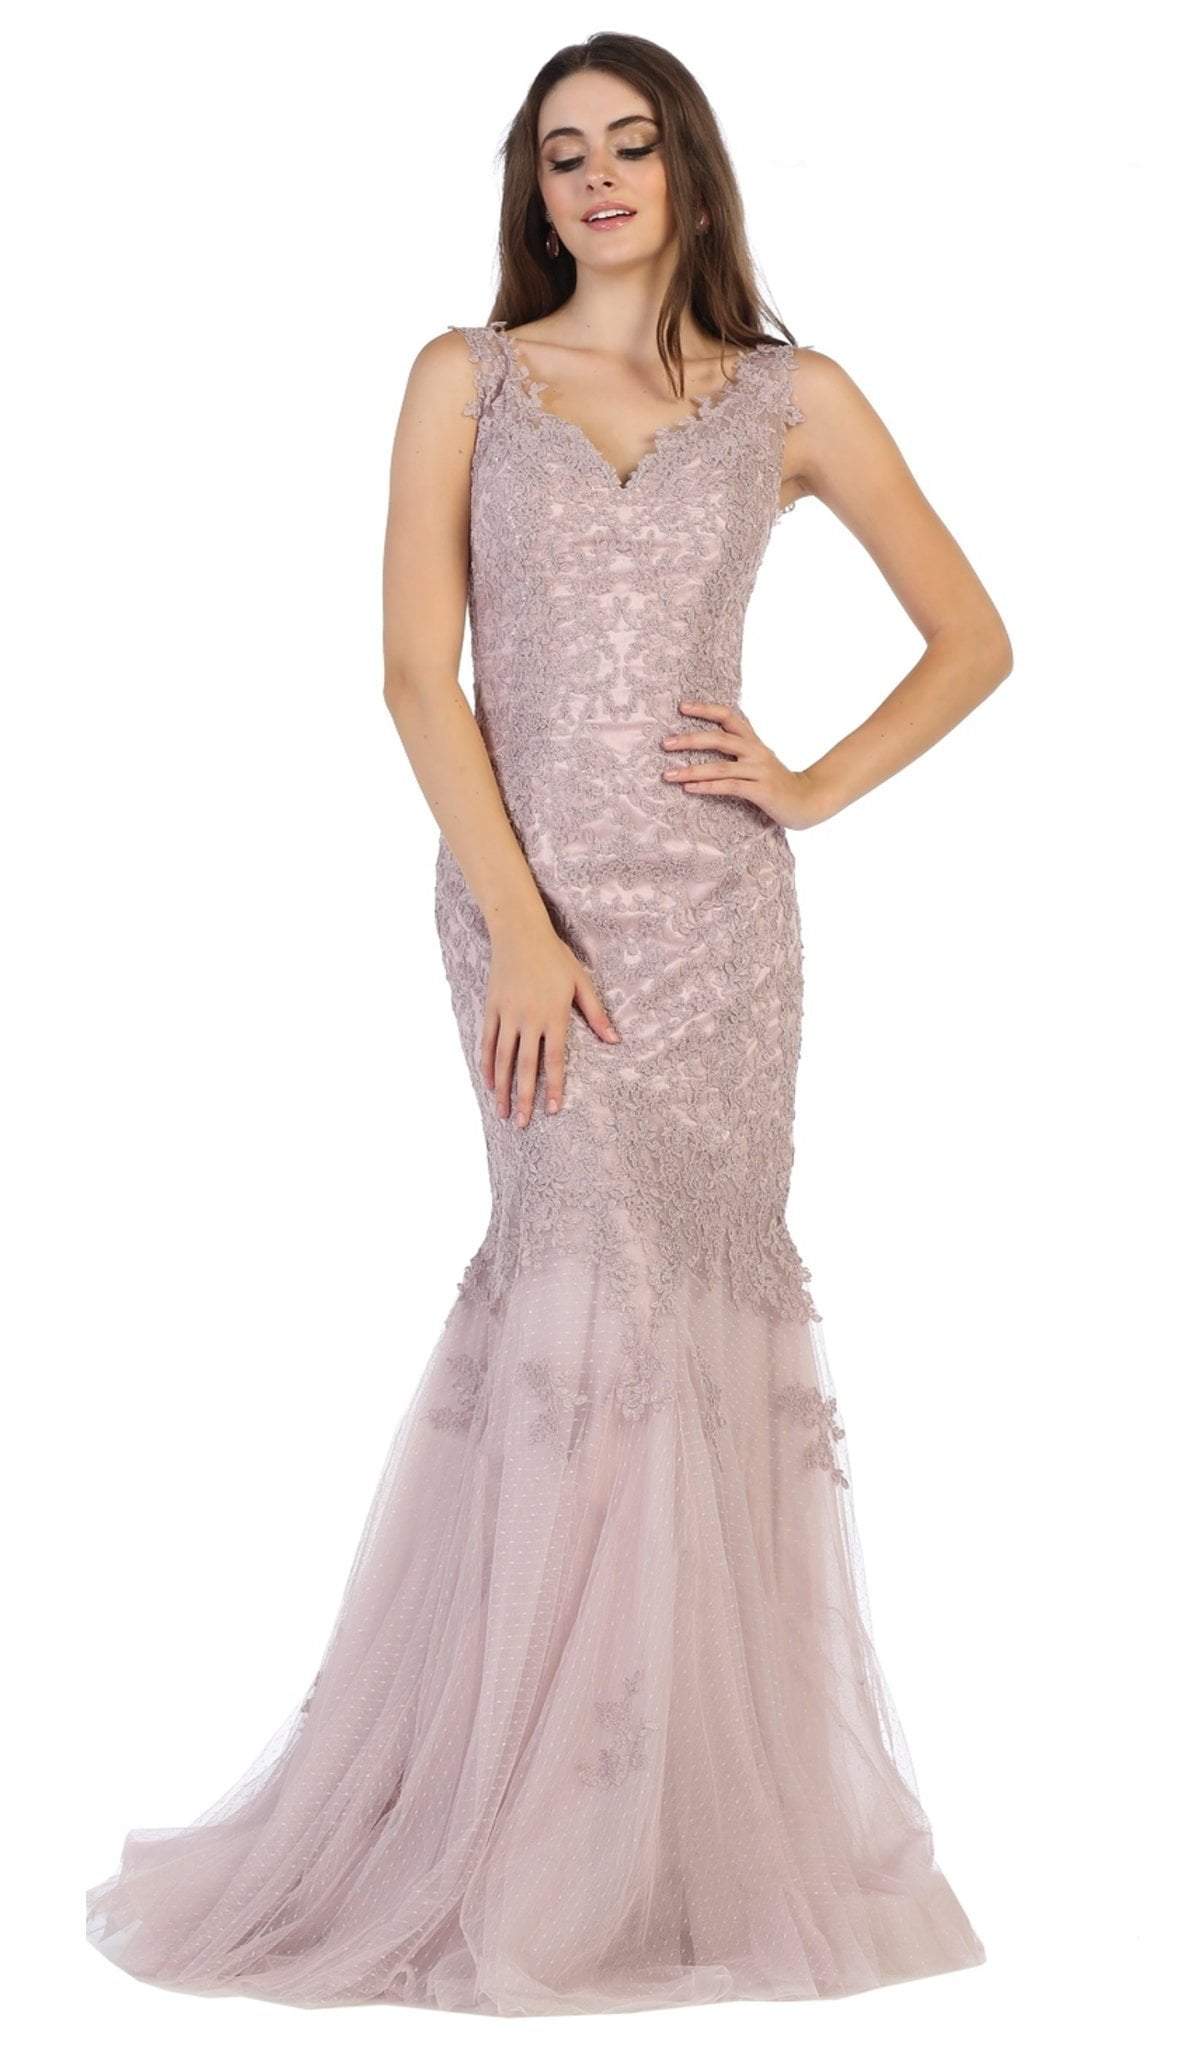 May Queen - MQ1598 Embroidered V-neck Mermaid Dress With Train Bridesmaid Dresses 4 / Mauve